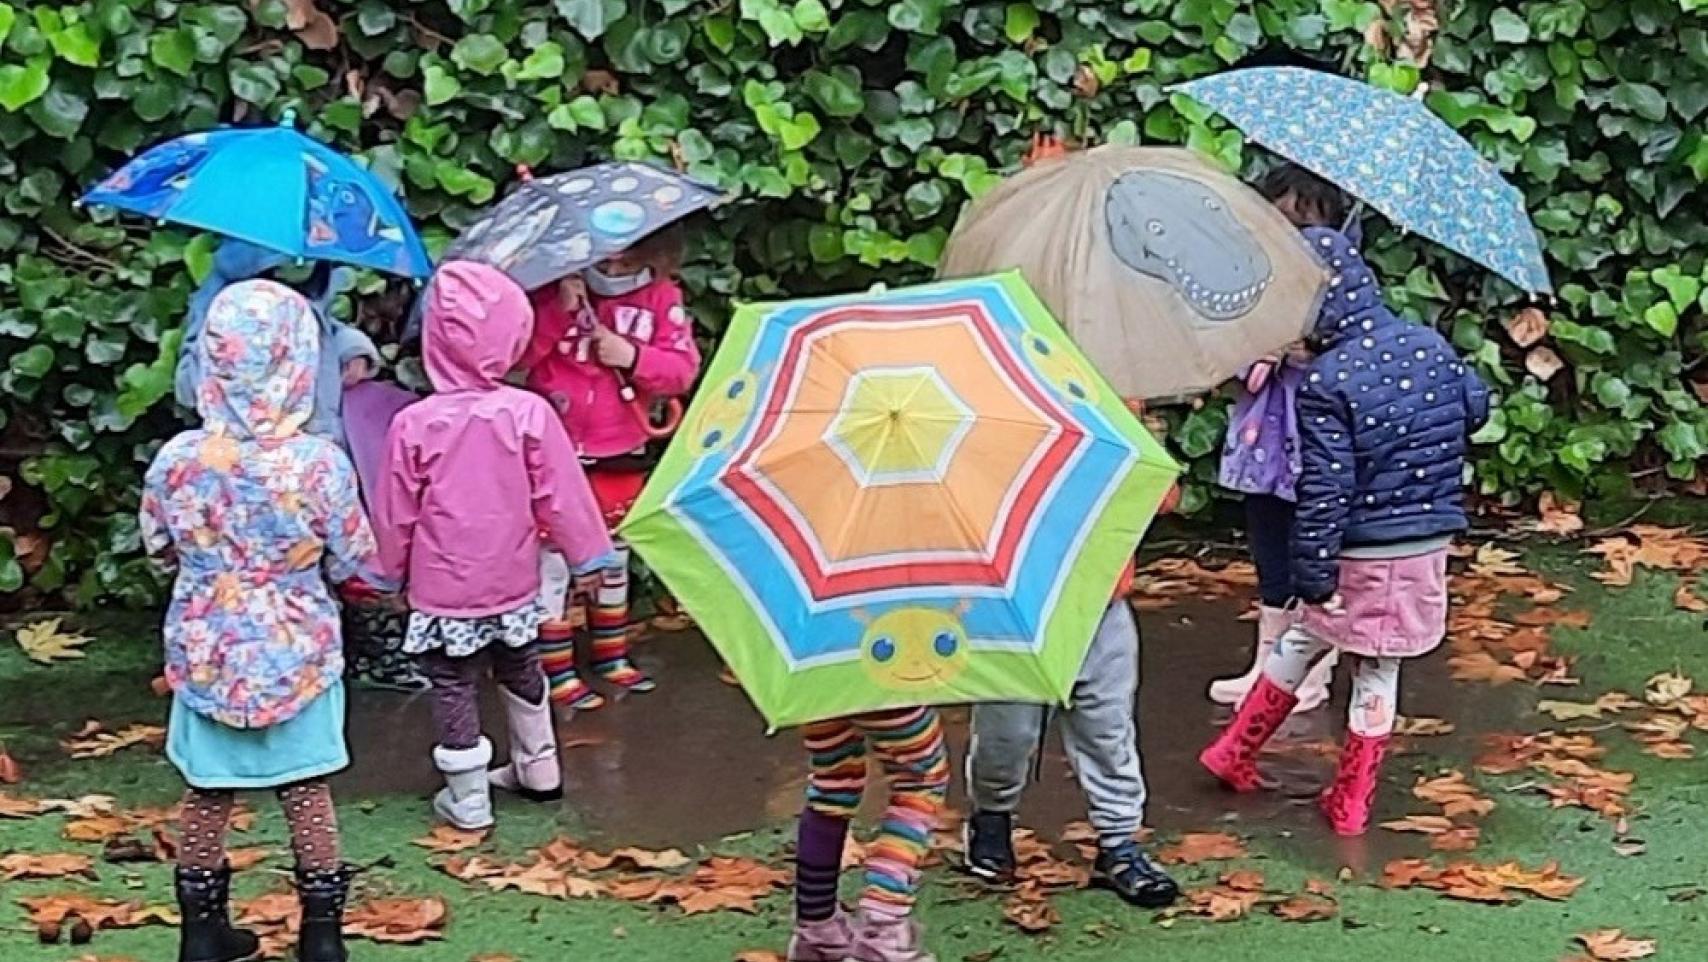 Children holding umbrellas playing in a puddle